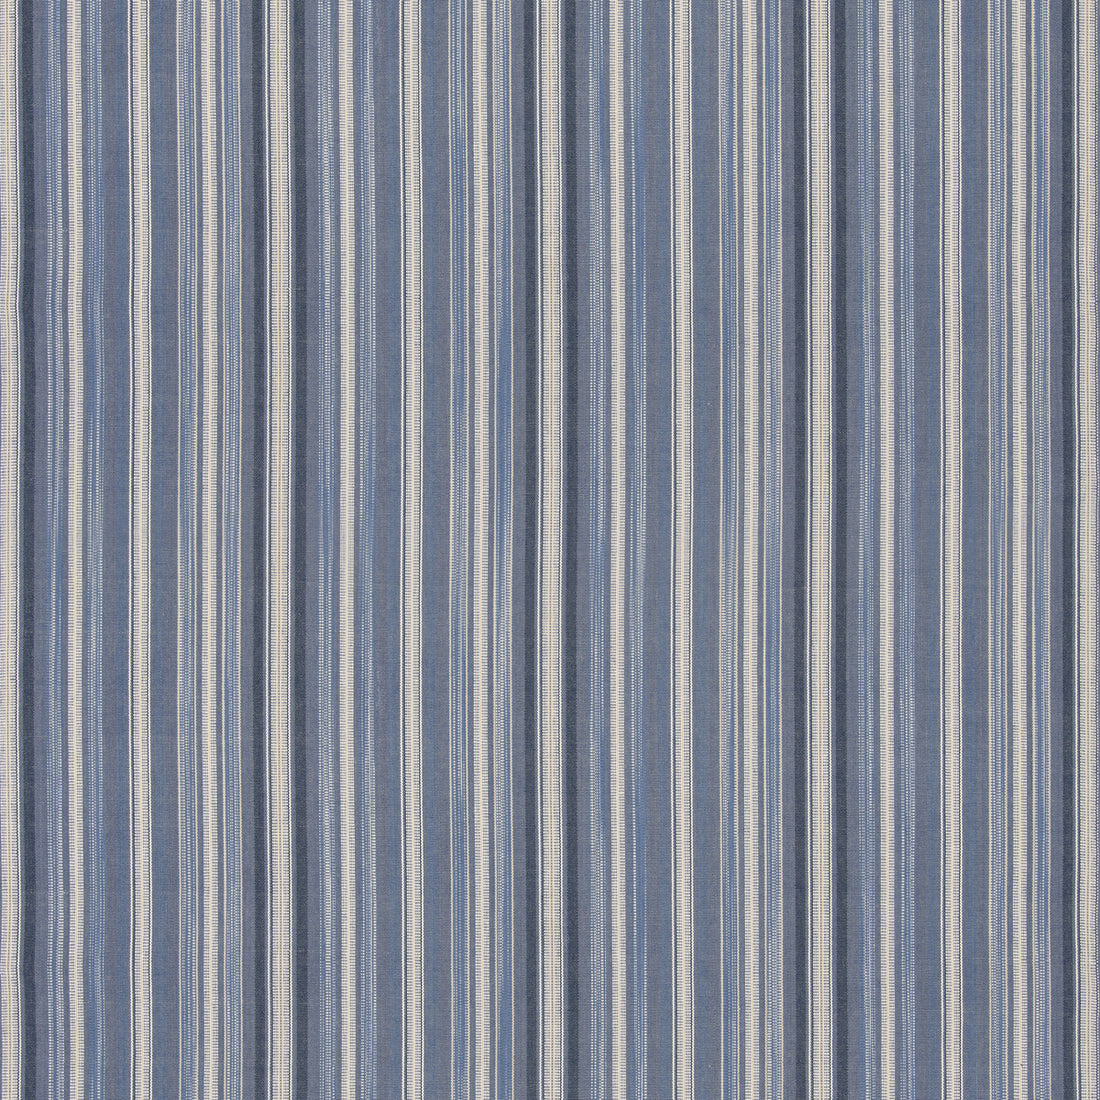 Rainstorm fabric in blue color - pattern BF11065.660.0 - by G P &amp; J Baker in the X Kit Kemp Stripes collection